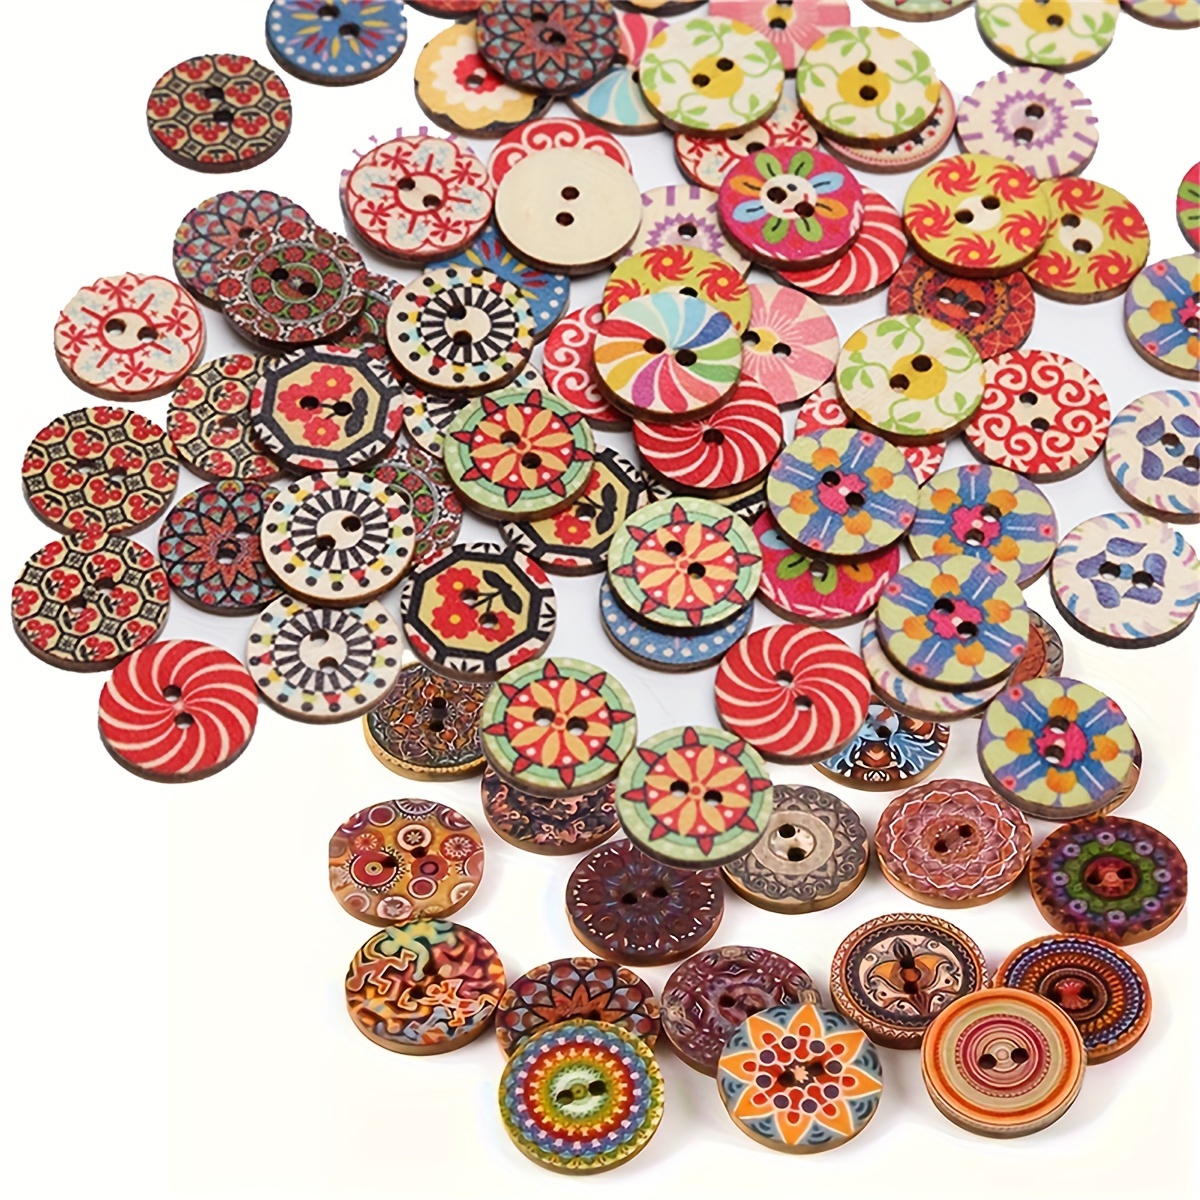 100pcs Mixed Color Wood Buttons For Handwork DIY Scrapbooking